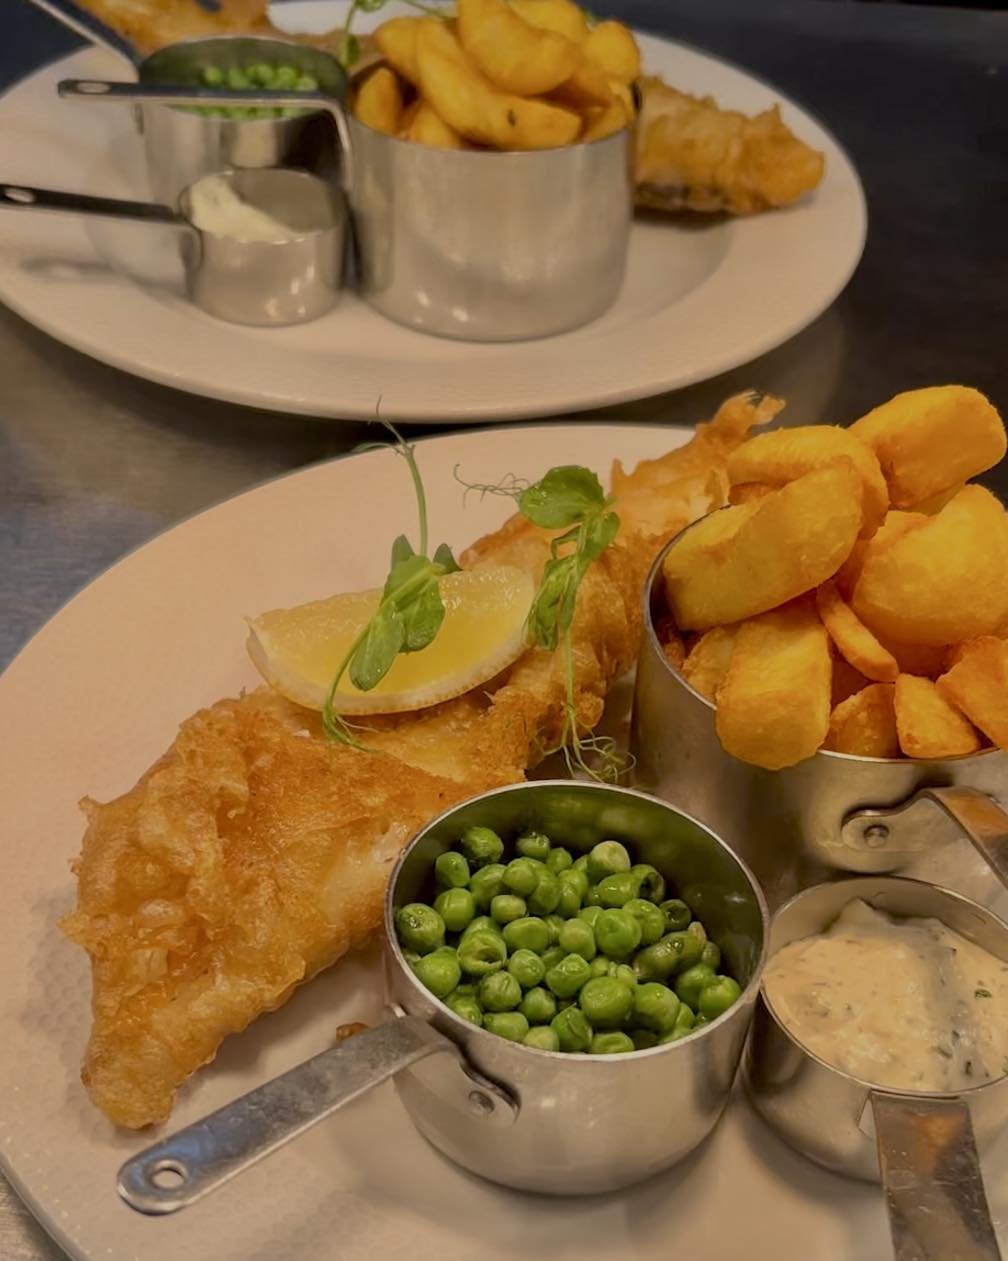 Fresh off the Day Boats, straight to our kitchen! 

#anchorinn #anchorinnpub #anchornayland #Nayland #Naylandsuffolk #suffolkcountyinns #suffolk #suffolkpub #suffolkcountryside #essex #essexpub #colchester #colchesterpubs #pub #pubfood